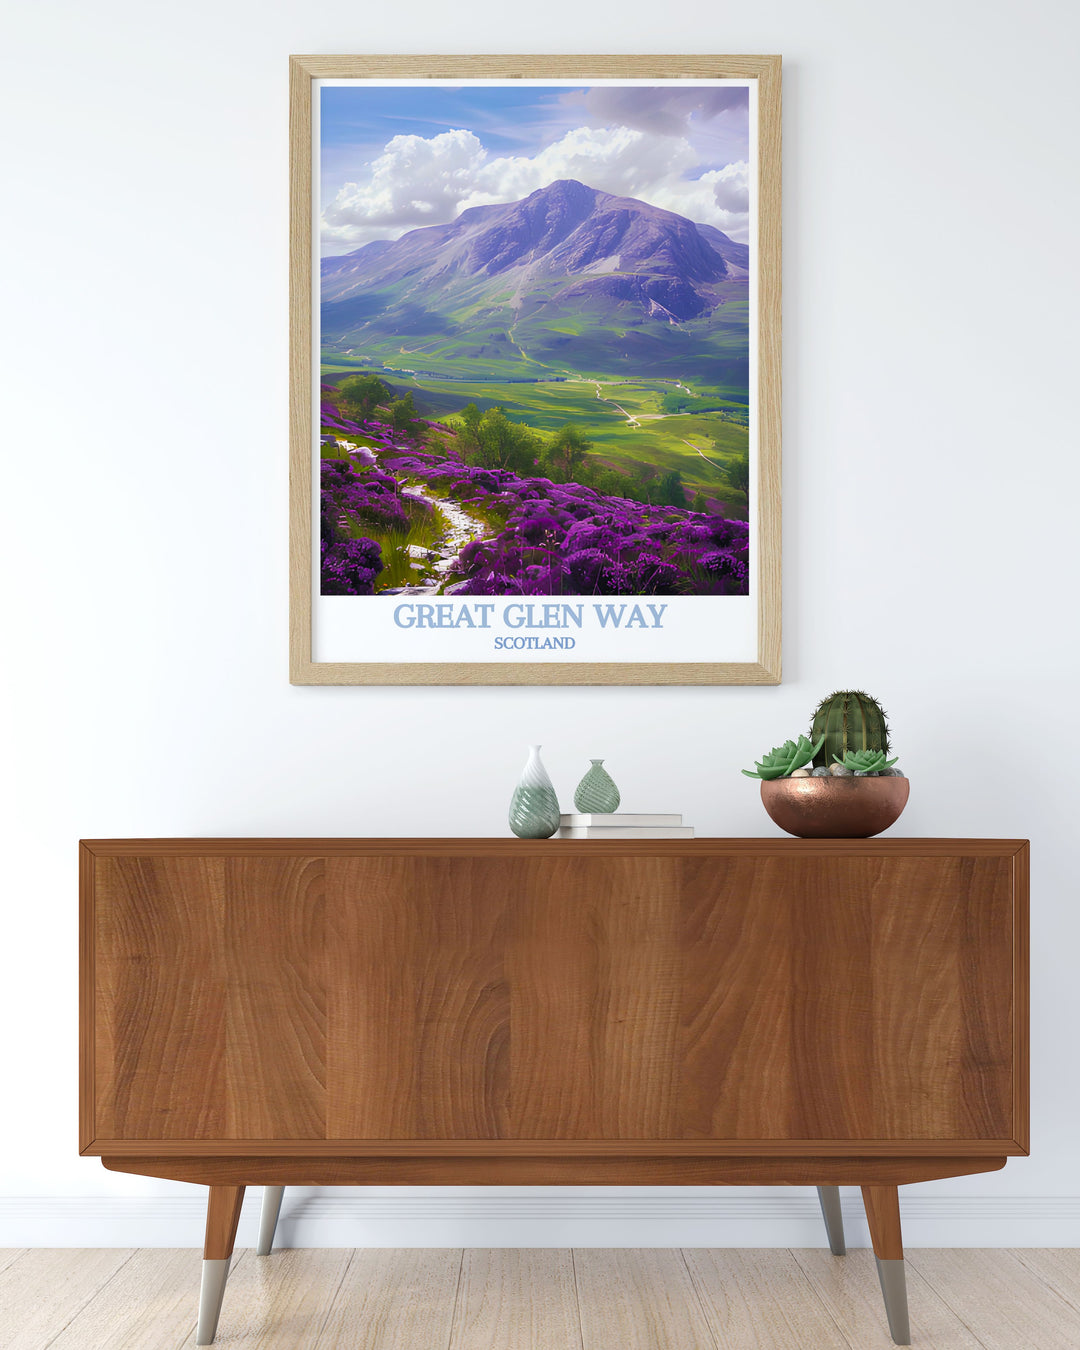 This detailed illustration of the Great Glen Way captures the scenic beauty and historical significance of the trail, inviting viewers to explore Scotlands natural wonders and rich heritage.